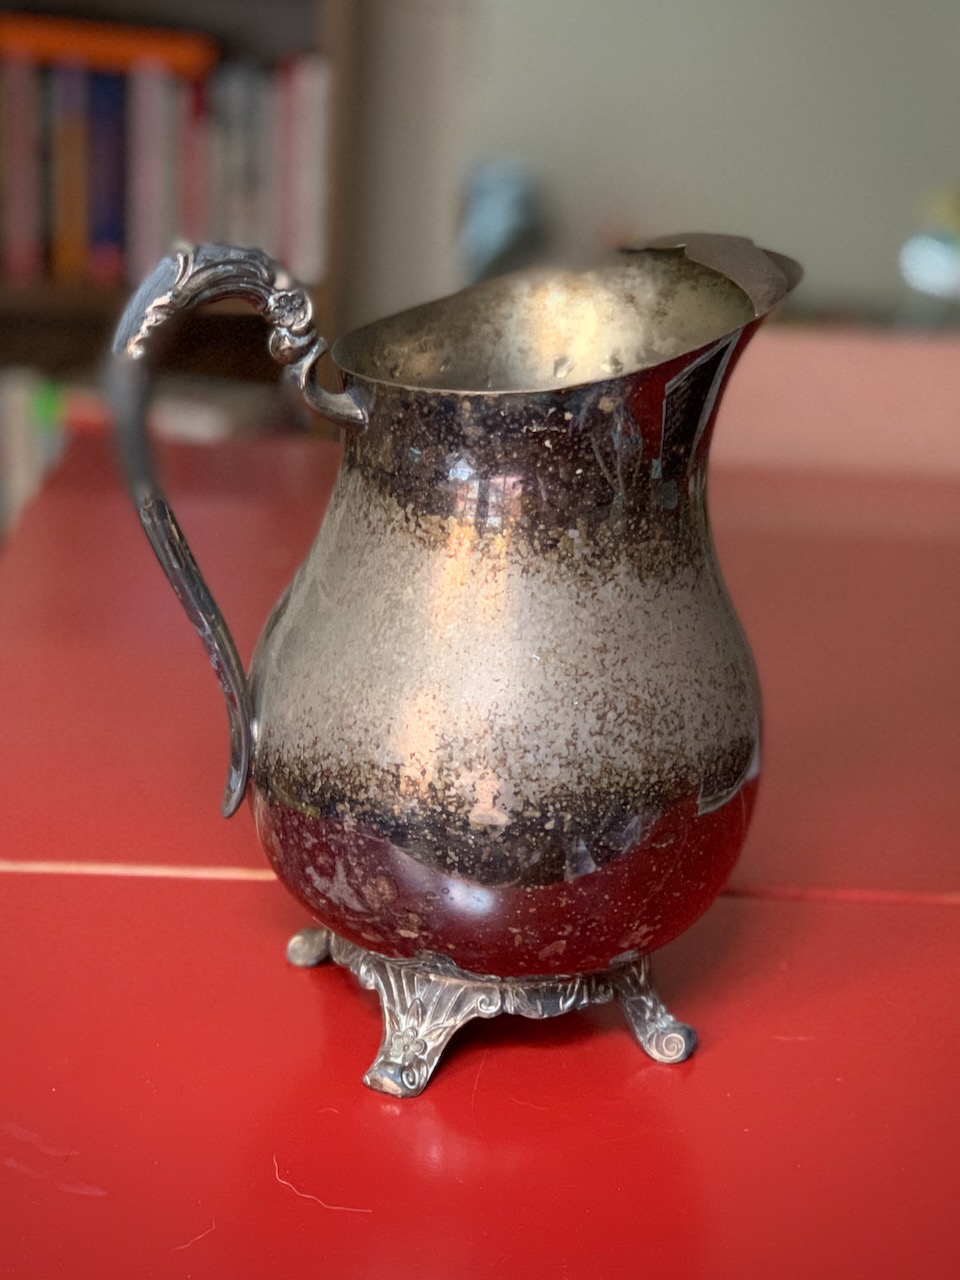 The antique pitcher I found